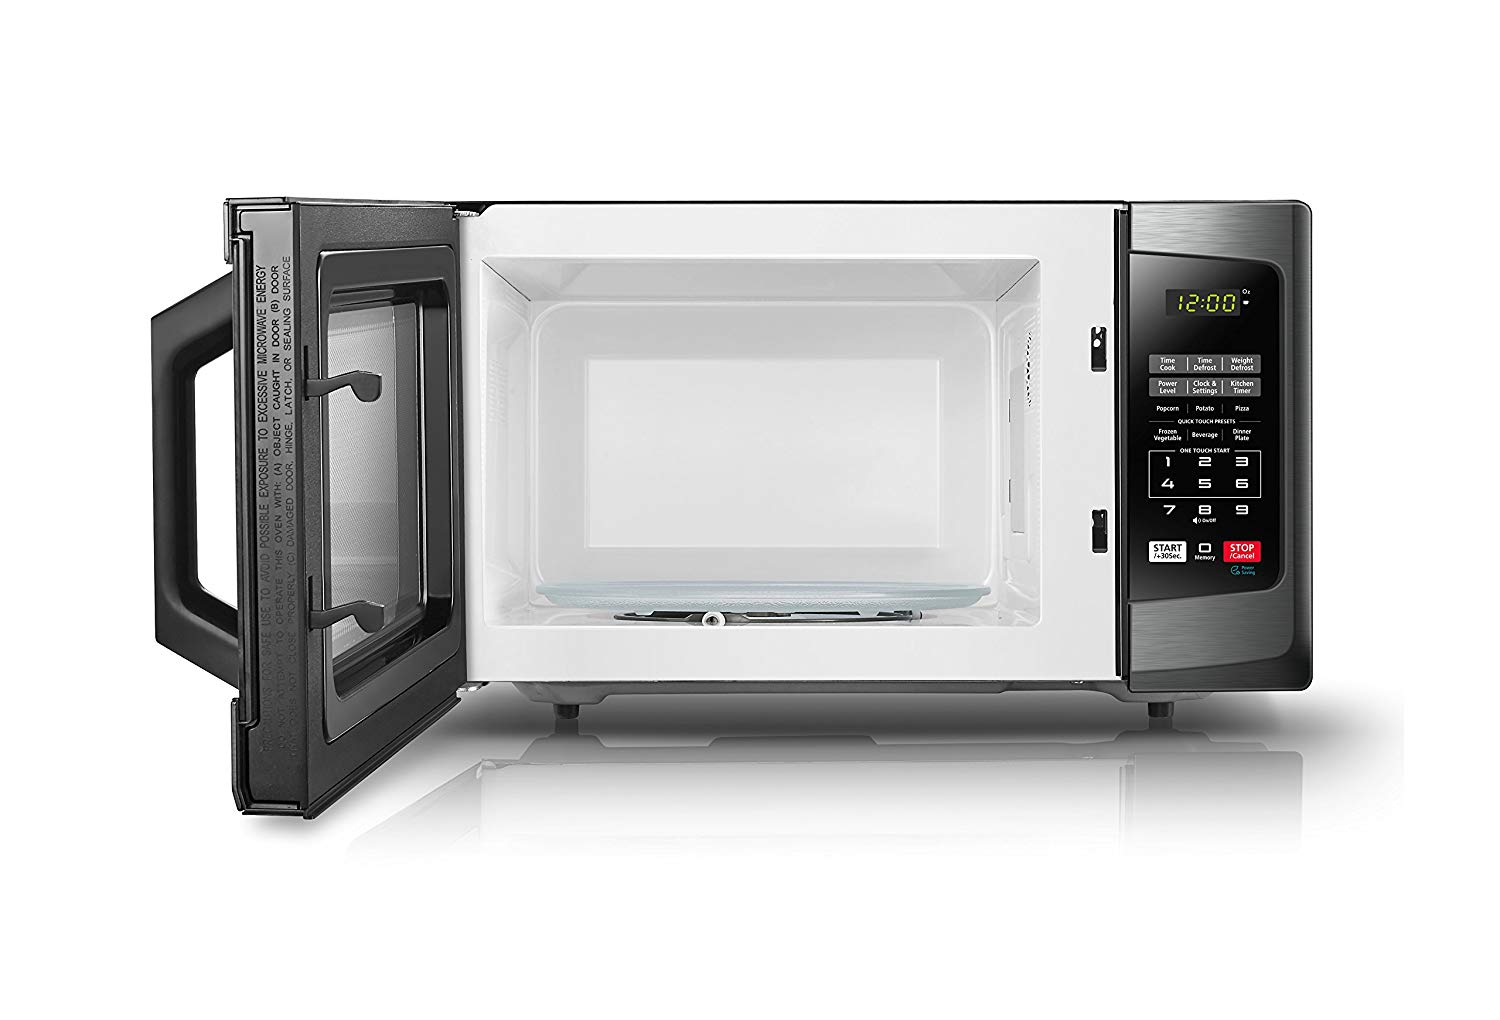 Healthy Toshiba Microwave Oven with Sound On/Off ECO Mode and LED Lighting